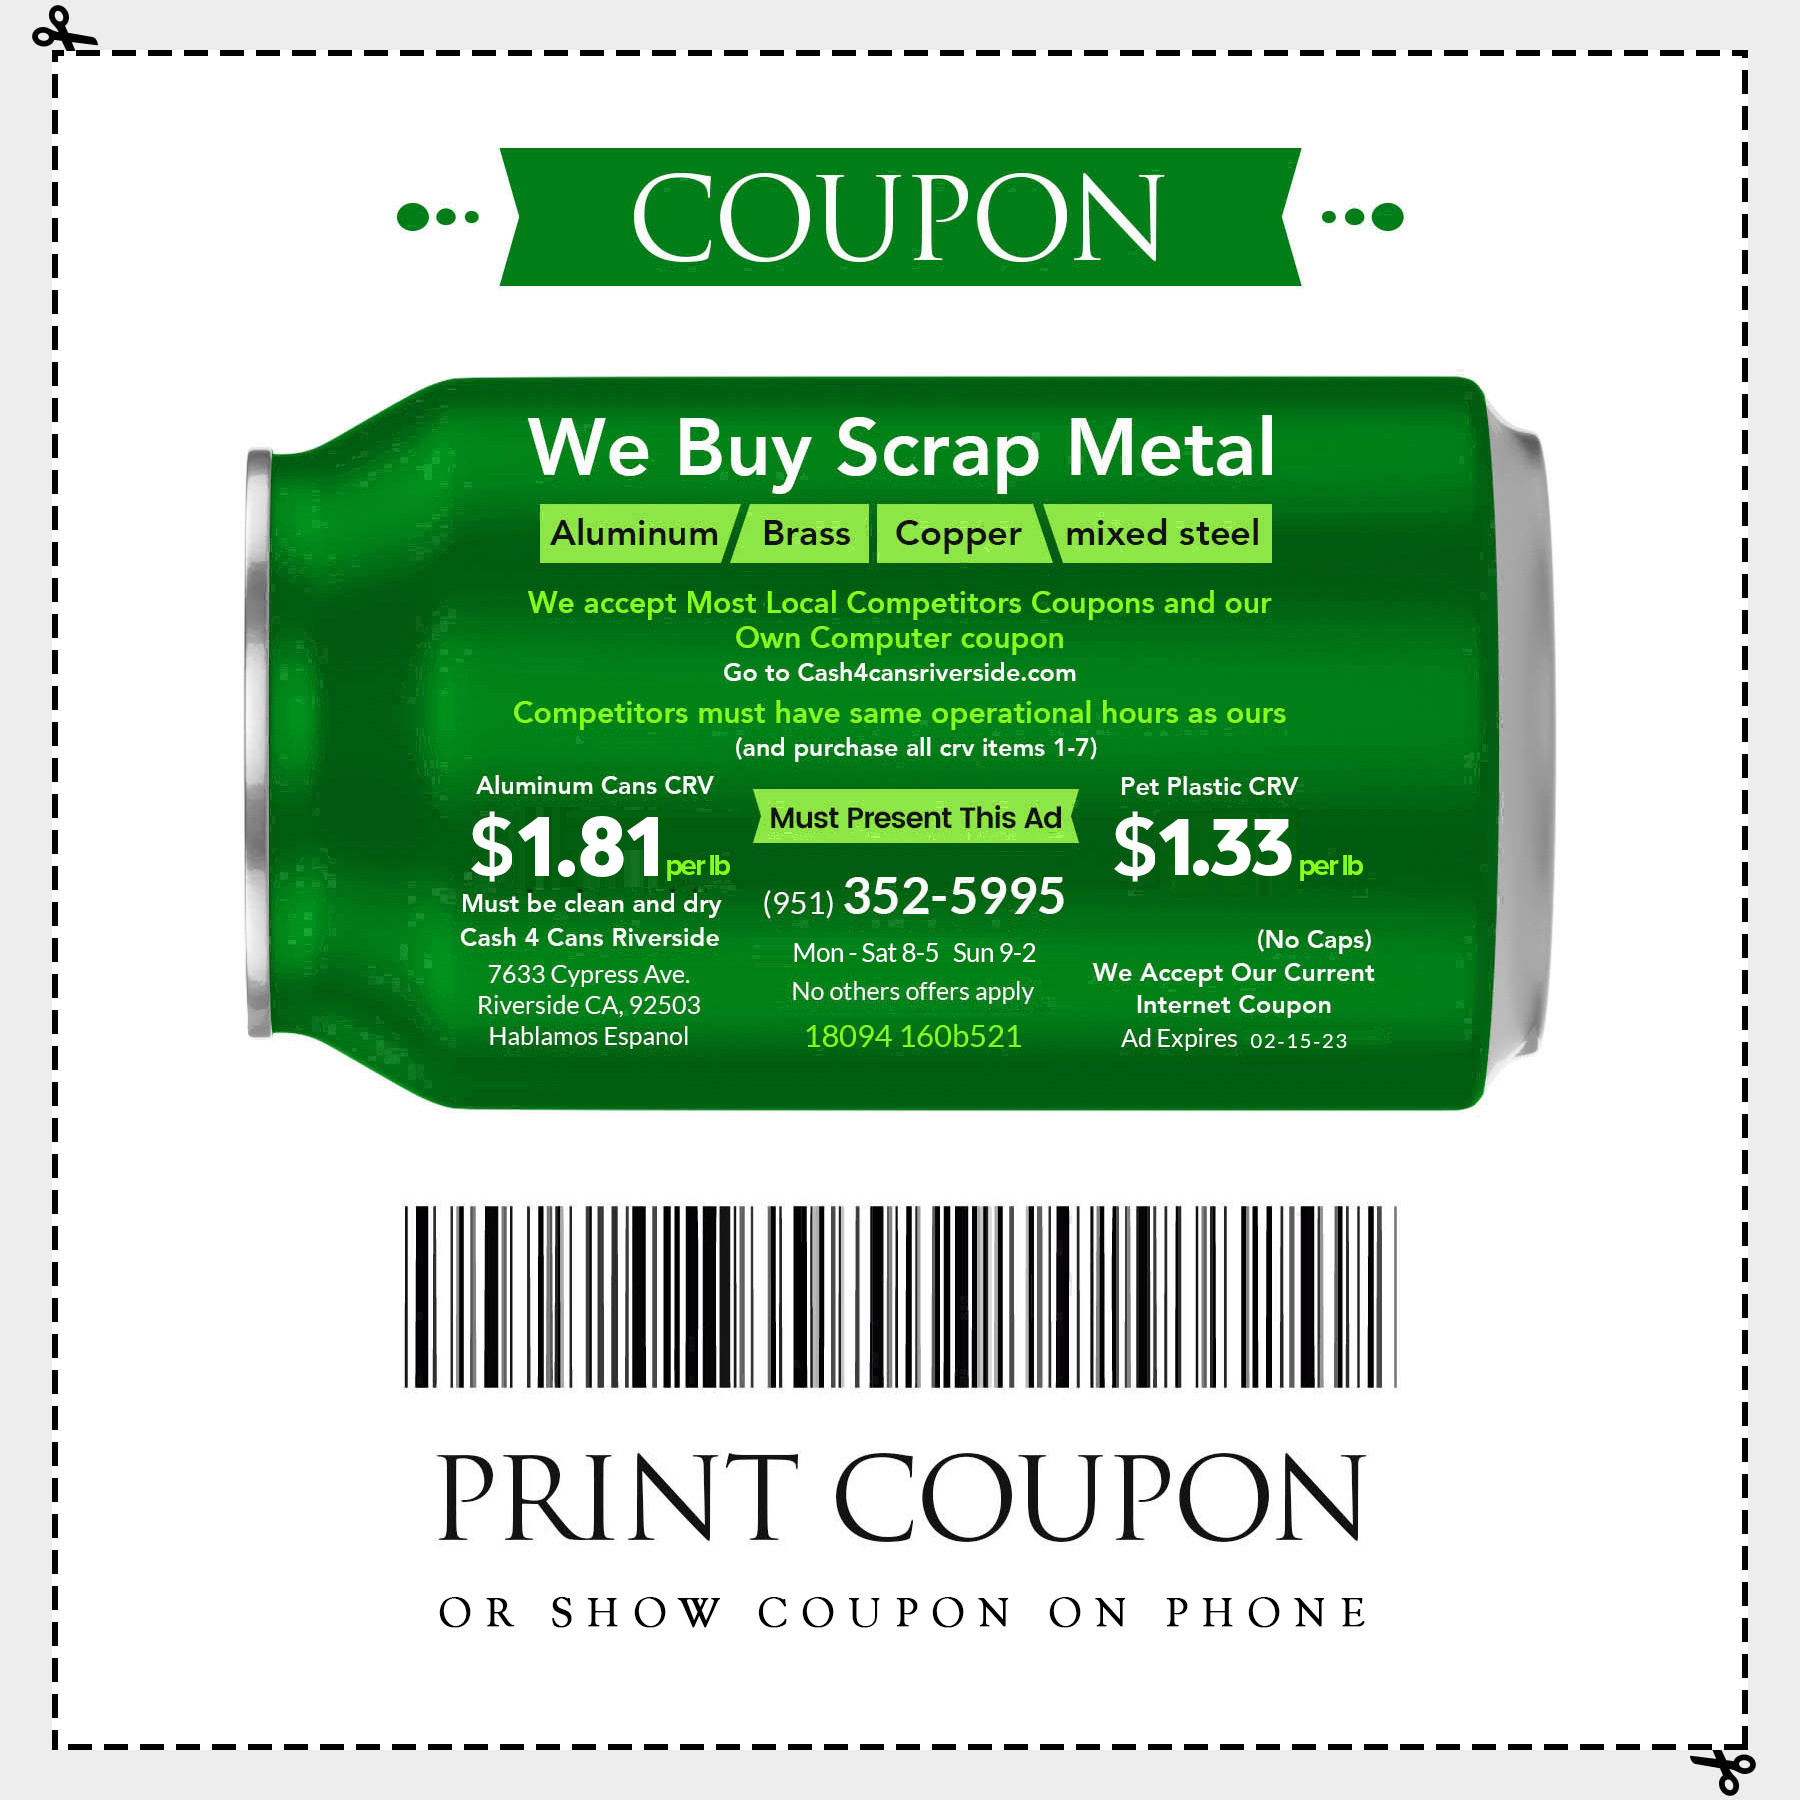 We buy scrap metal Aluminum, Brass, Copper, Mixed steel. We accept most local competitors coupons and our own computer coupon. Competitors must have same operational hours as ours (and purchase all crv items 1-7). One Must present this add. Aluminum Cans CRV $1.81 per lb and Pet Plastic CRV $1.33 per lb.